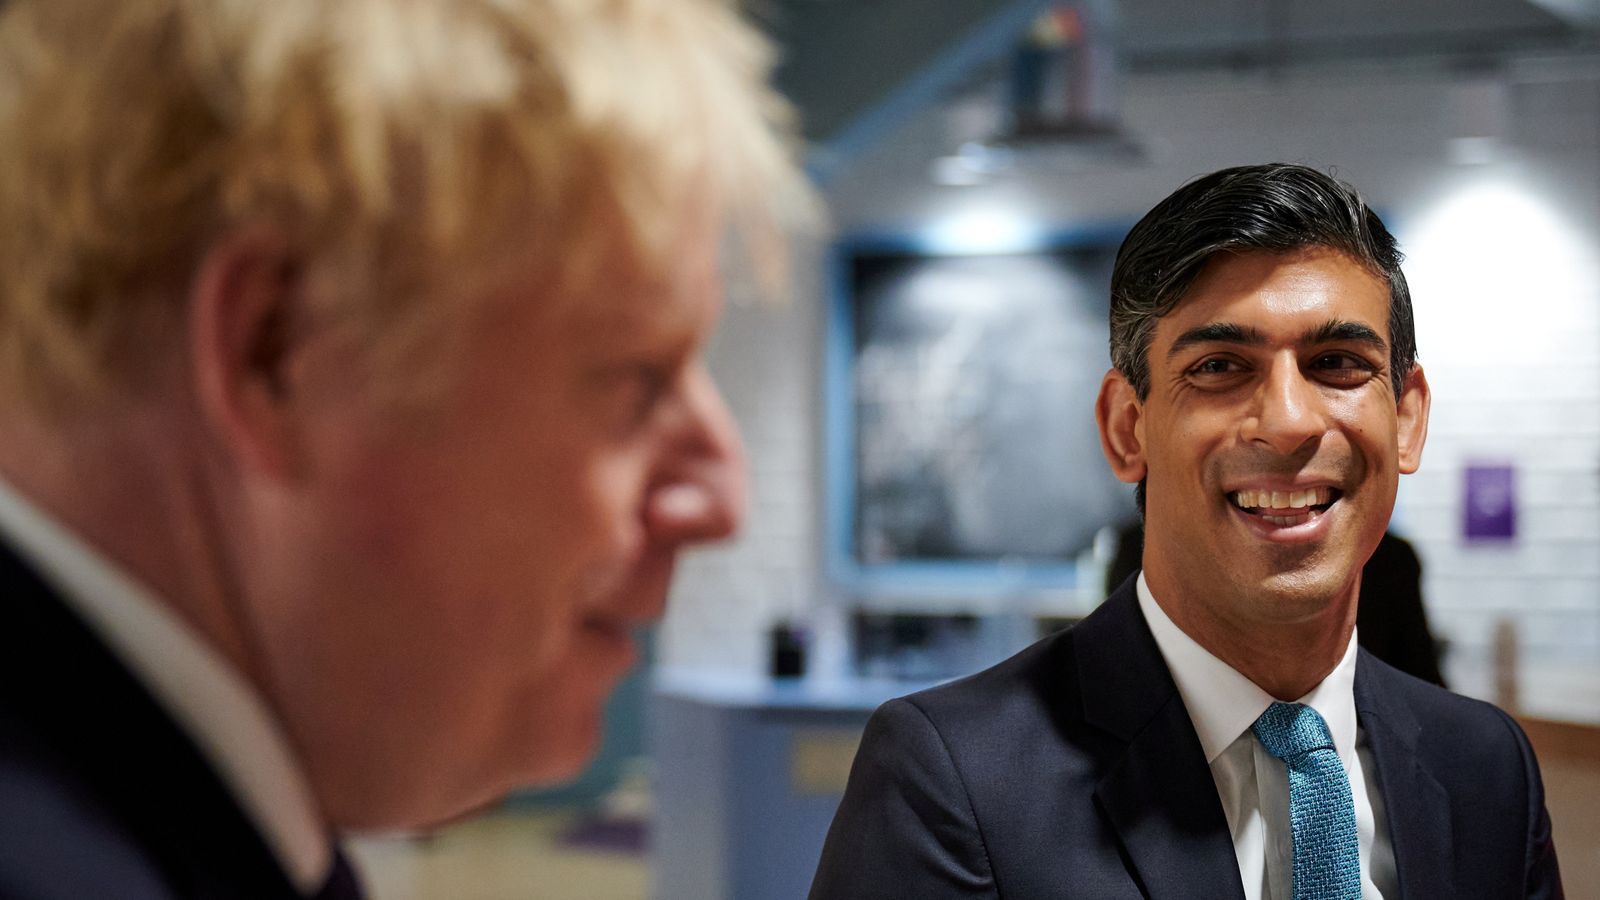 Government accused of COVID inquiry 'cover-up' as legal battle beckons over Boris Johnson's WhatsApp messages